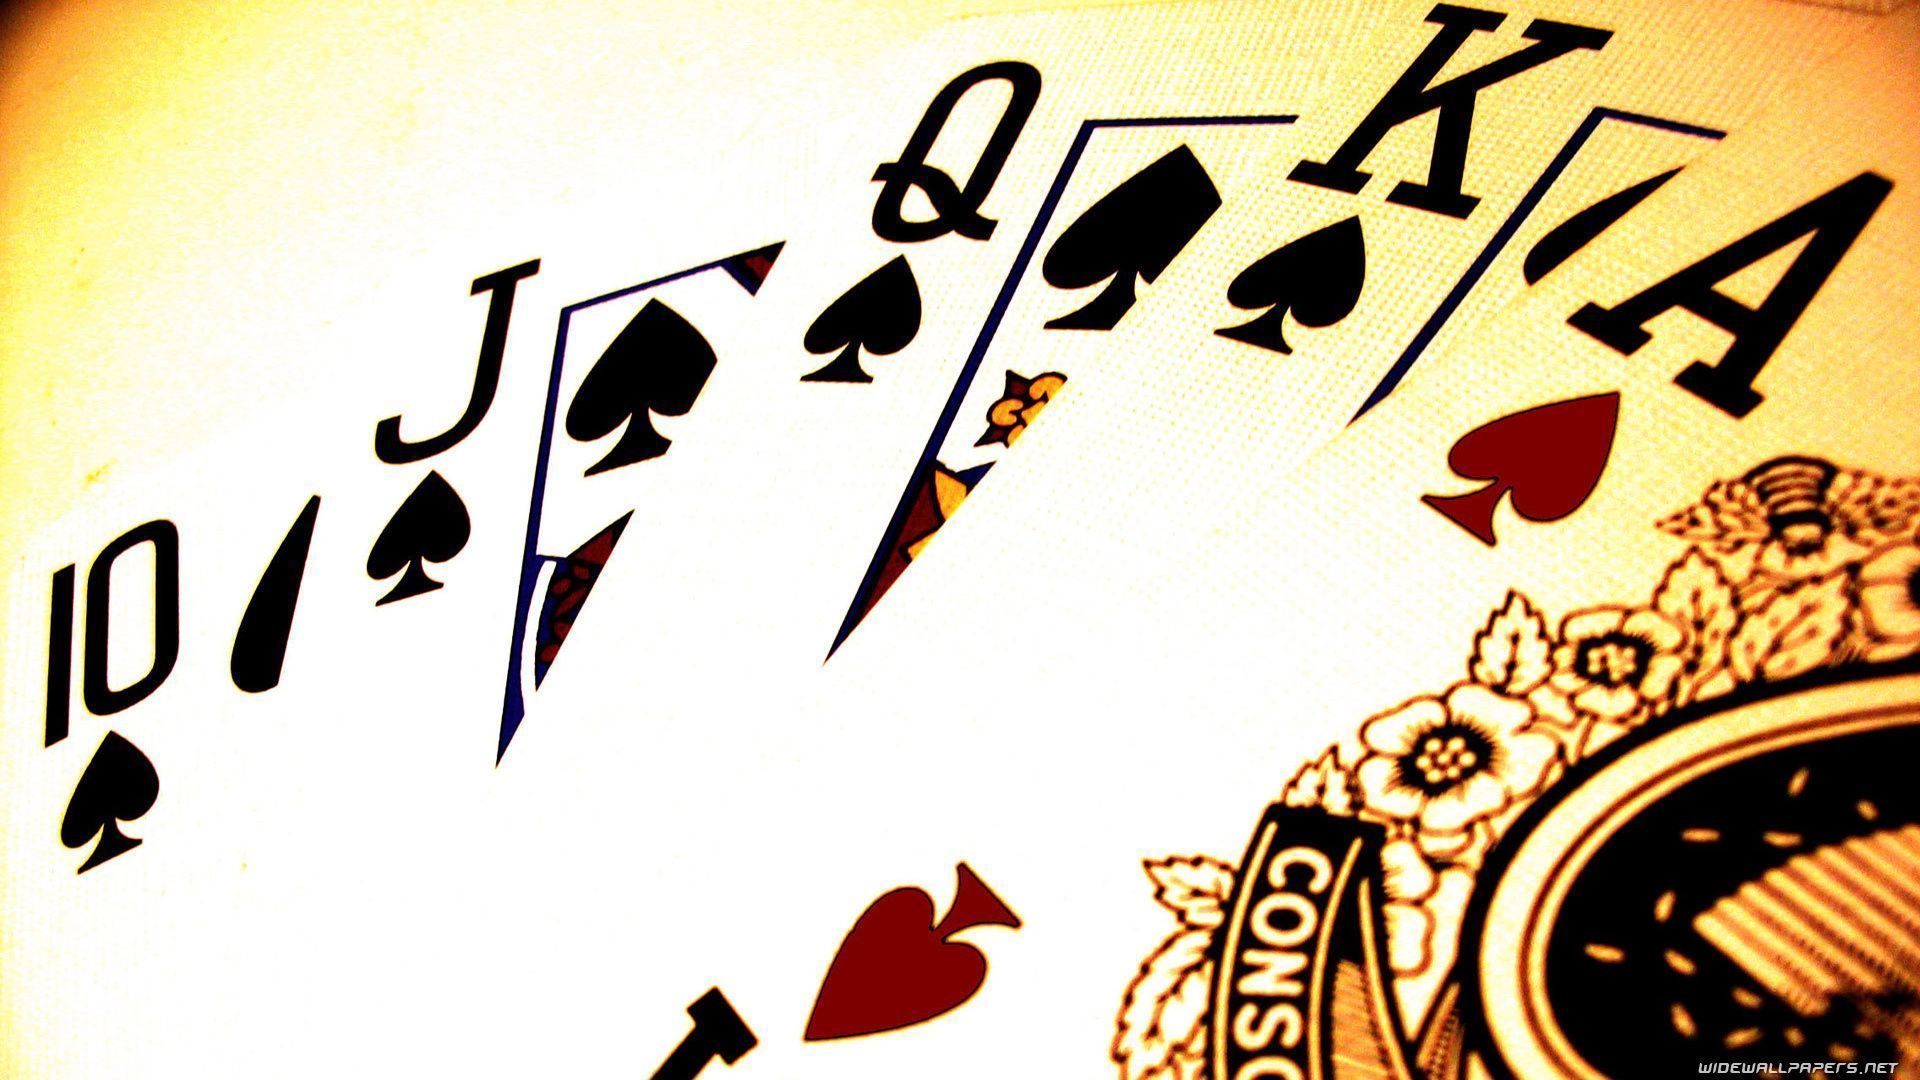 Believing Any Of those Myths About Casino Slot Retains You From Growing